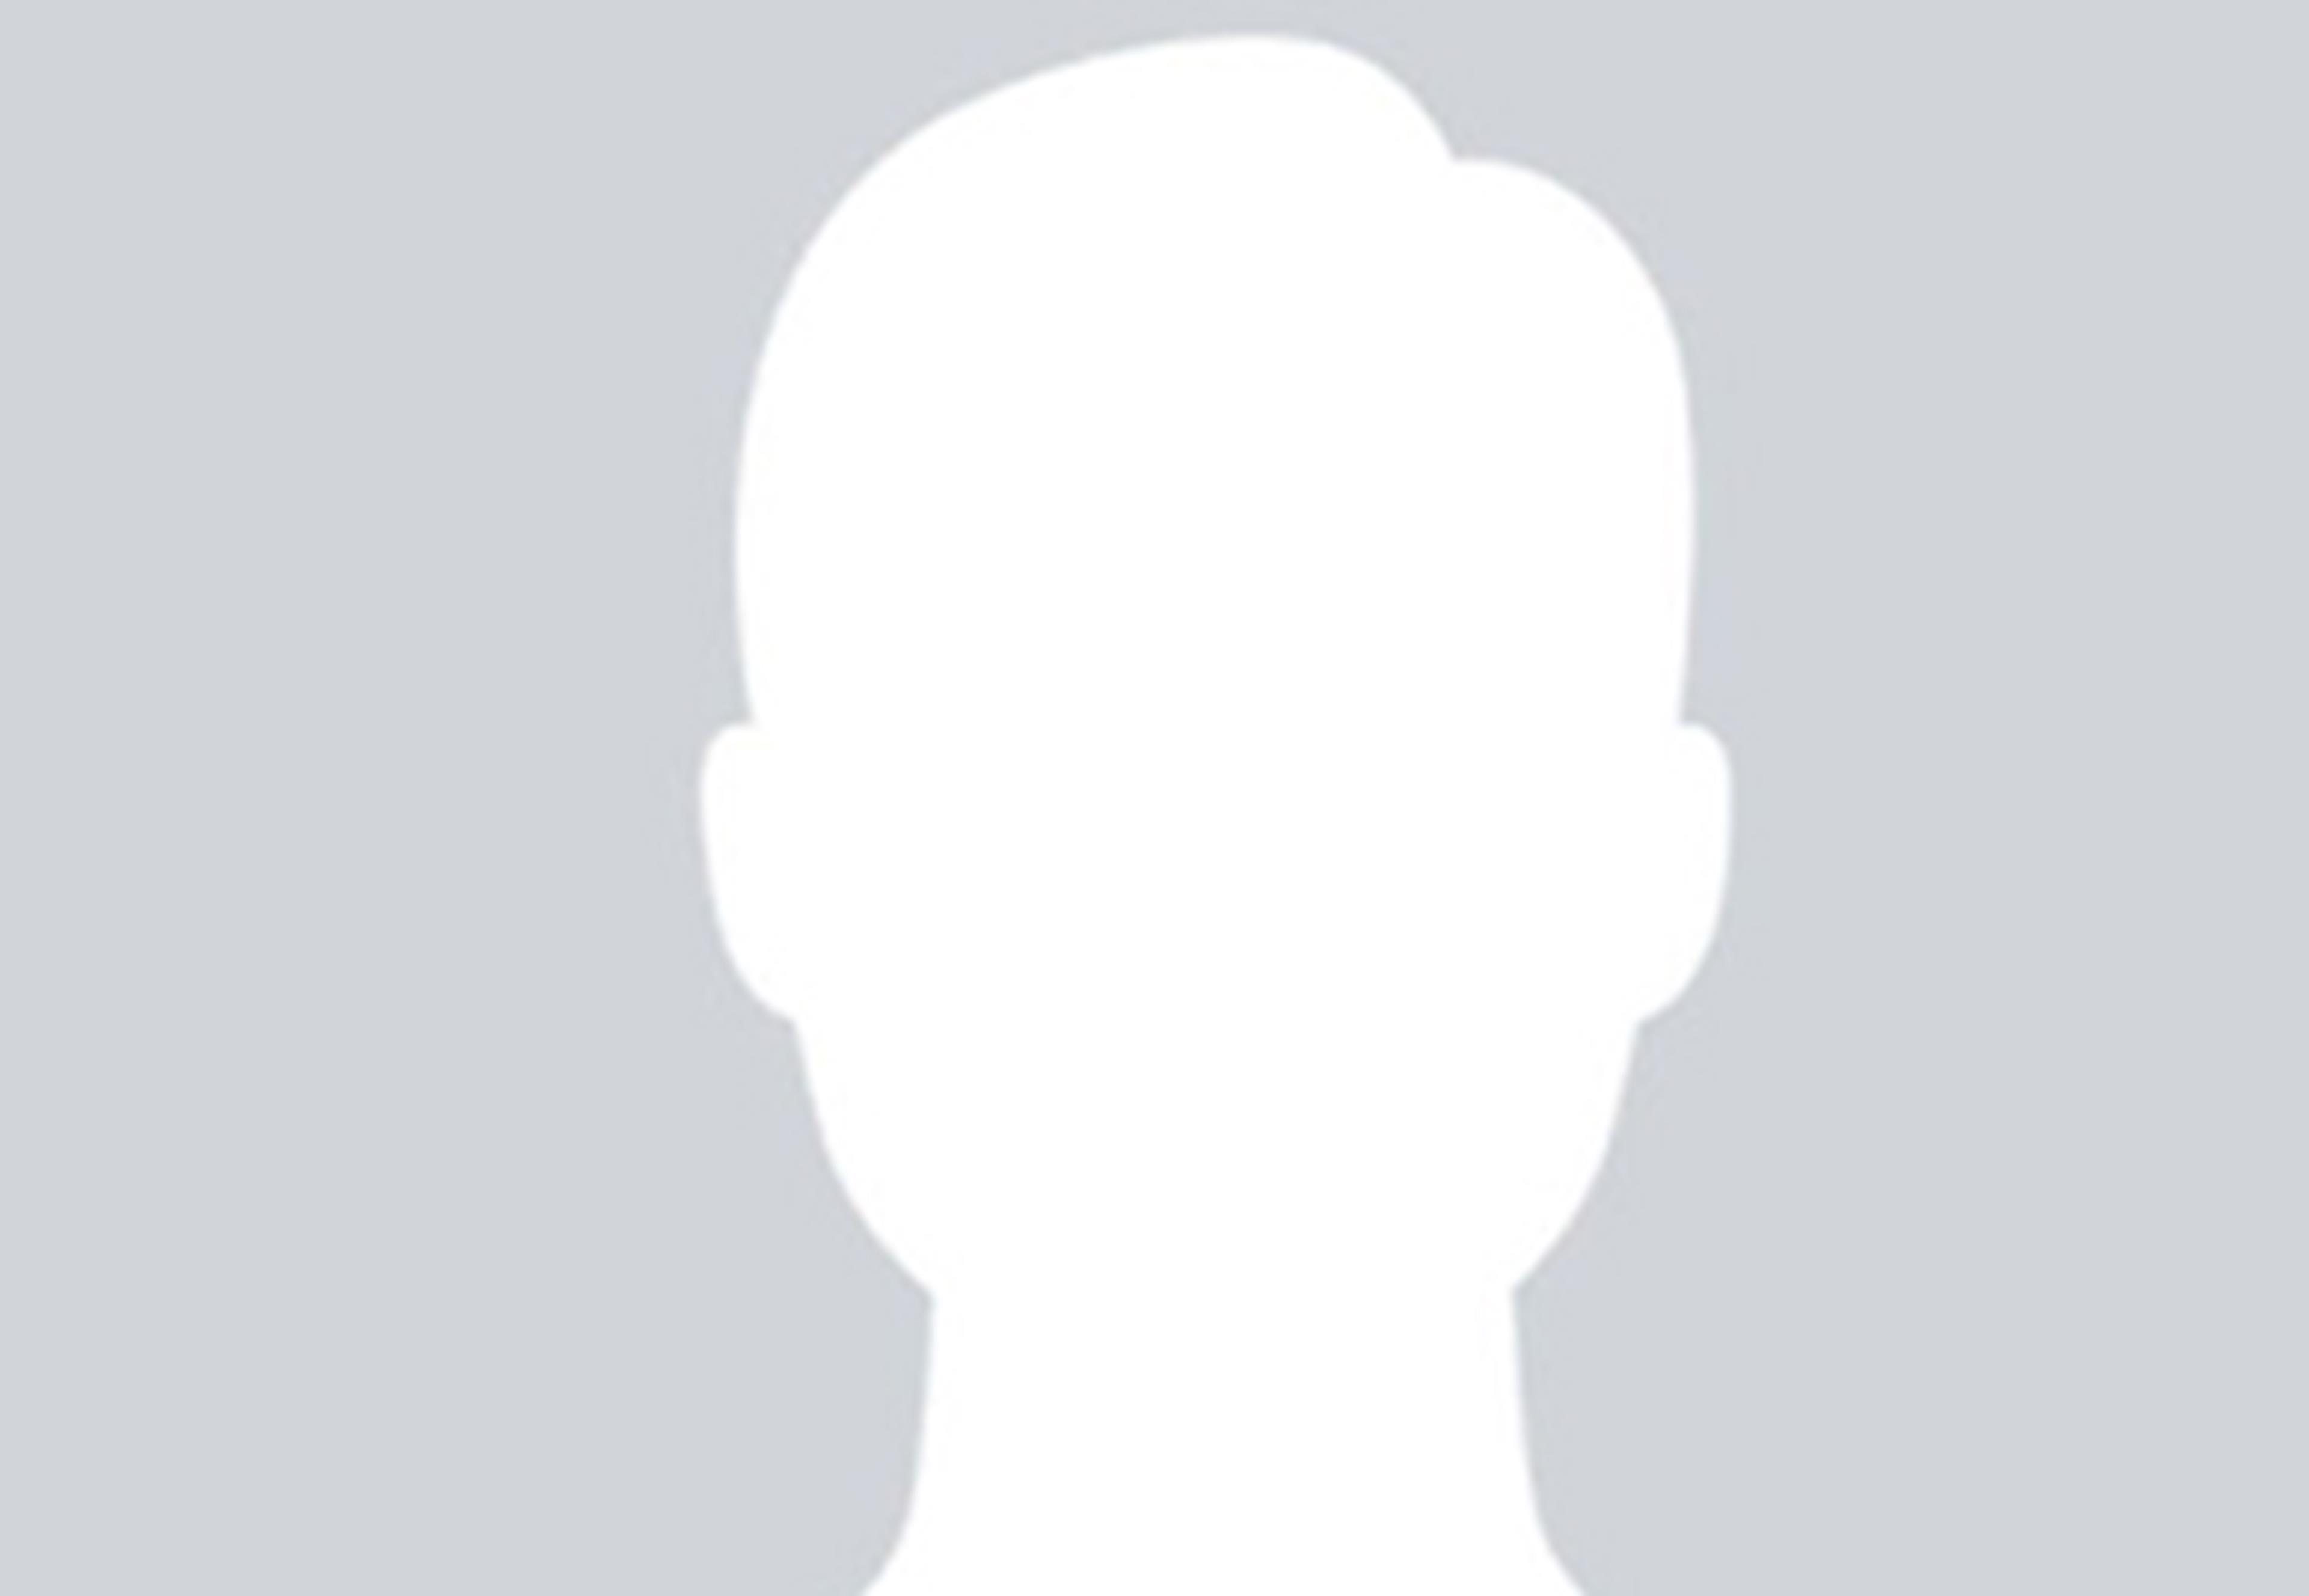 Placeholder image of silhouette on grey background